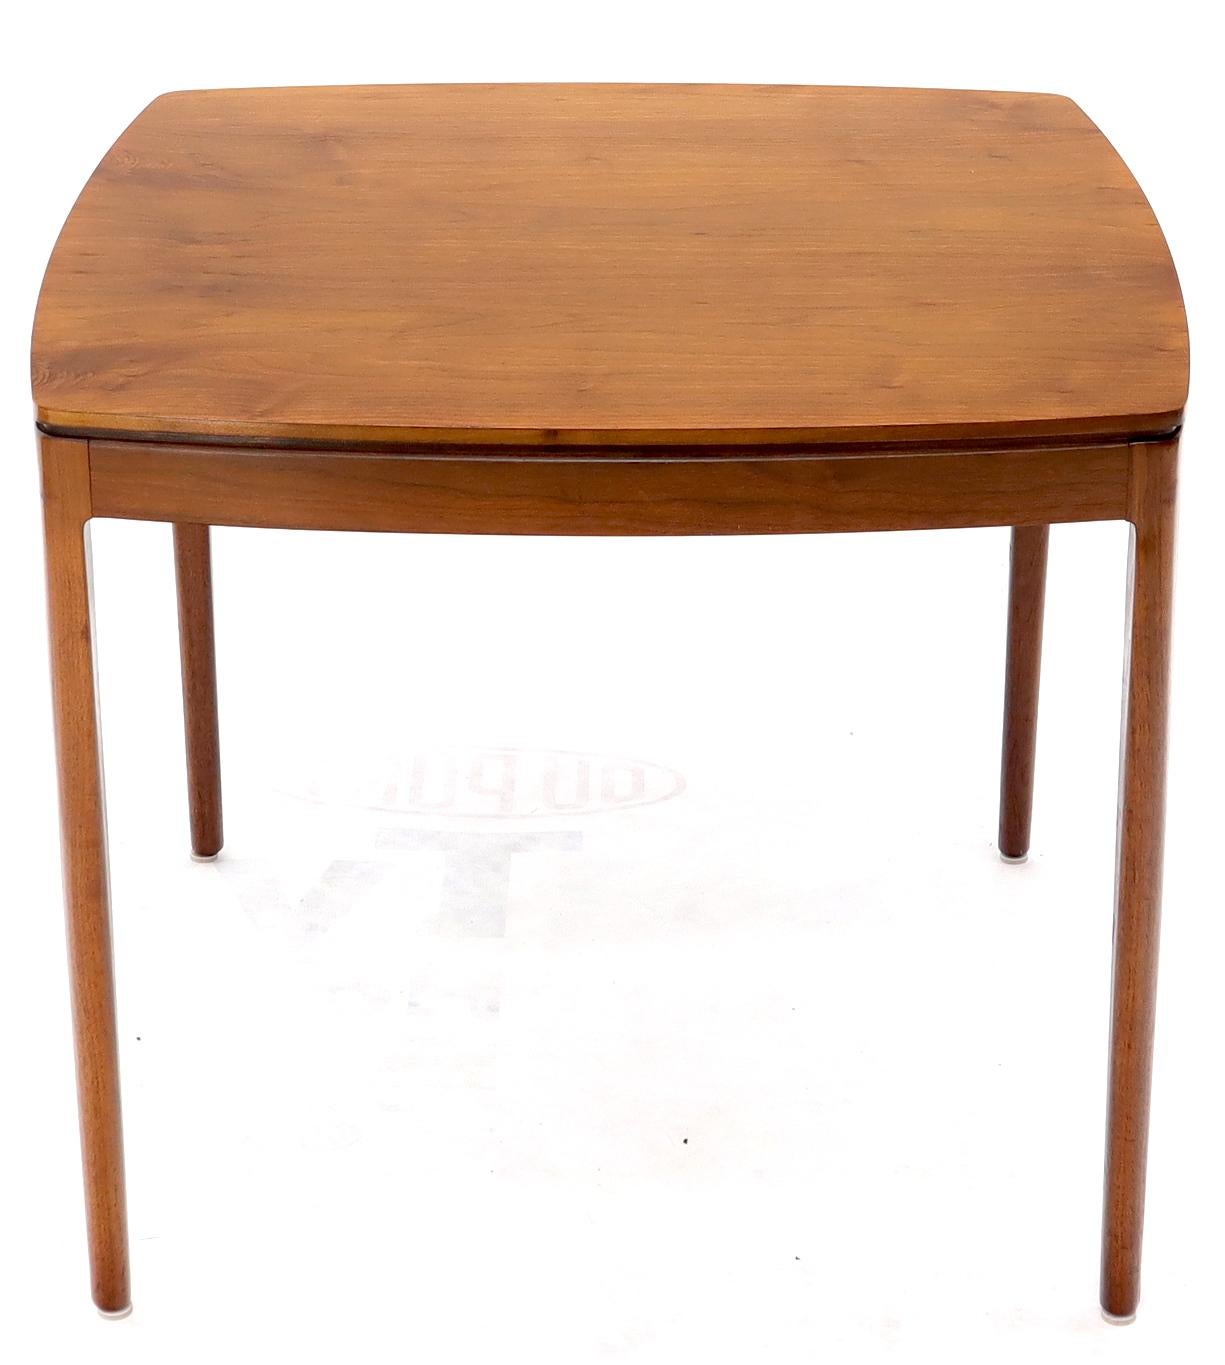 American Midcentury Oiled Walnut Rounded Square Game Table